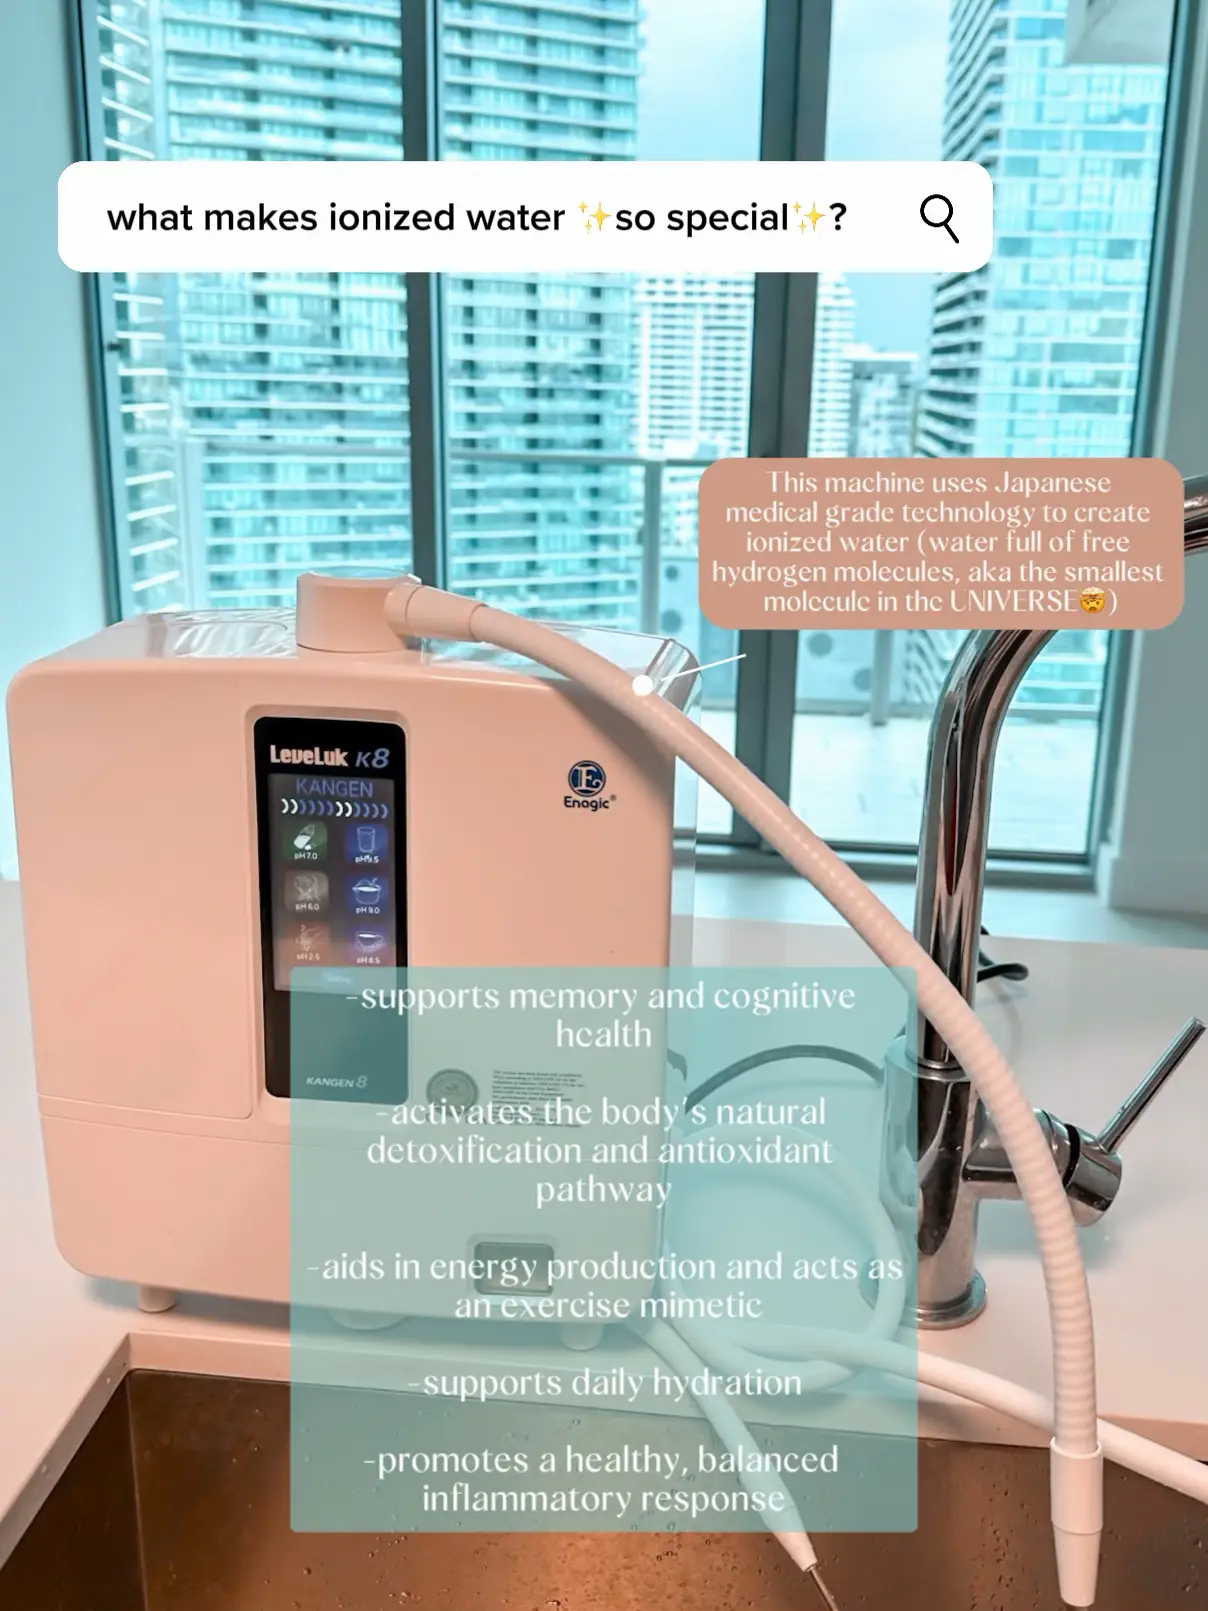  A machine that creates ionized water and has a positive impact on mental and physical health.